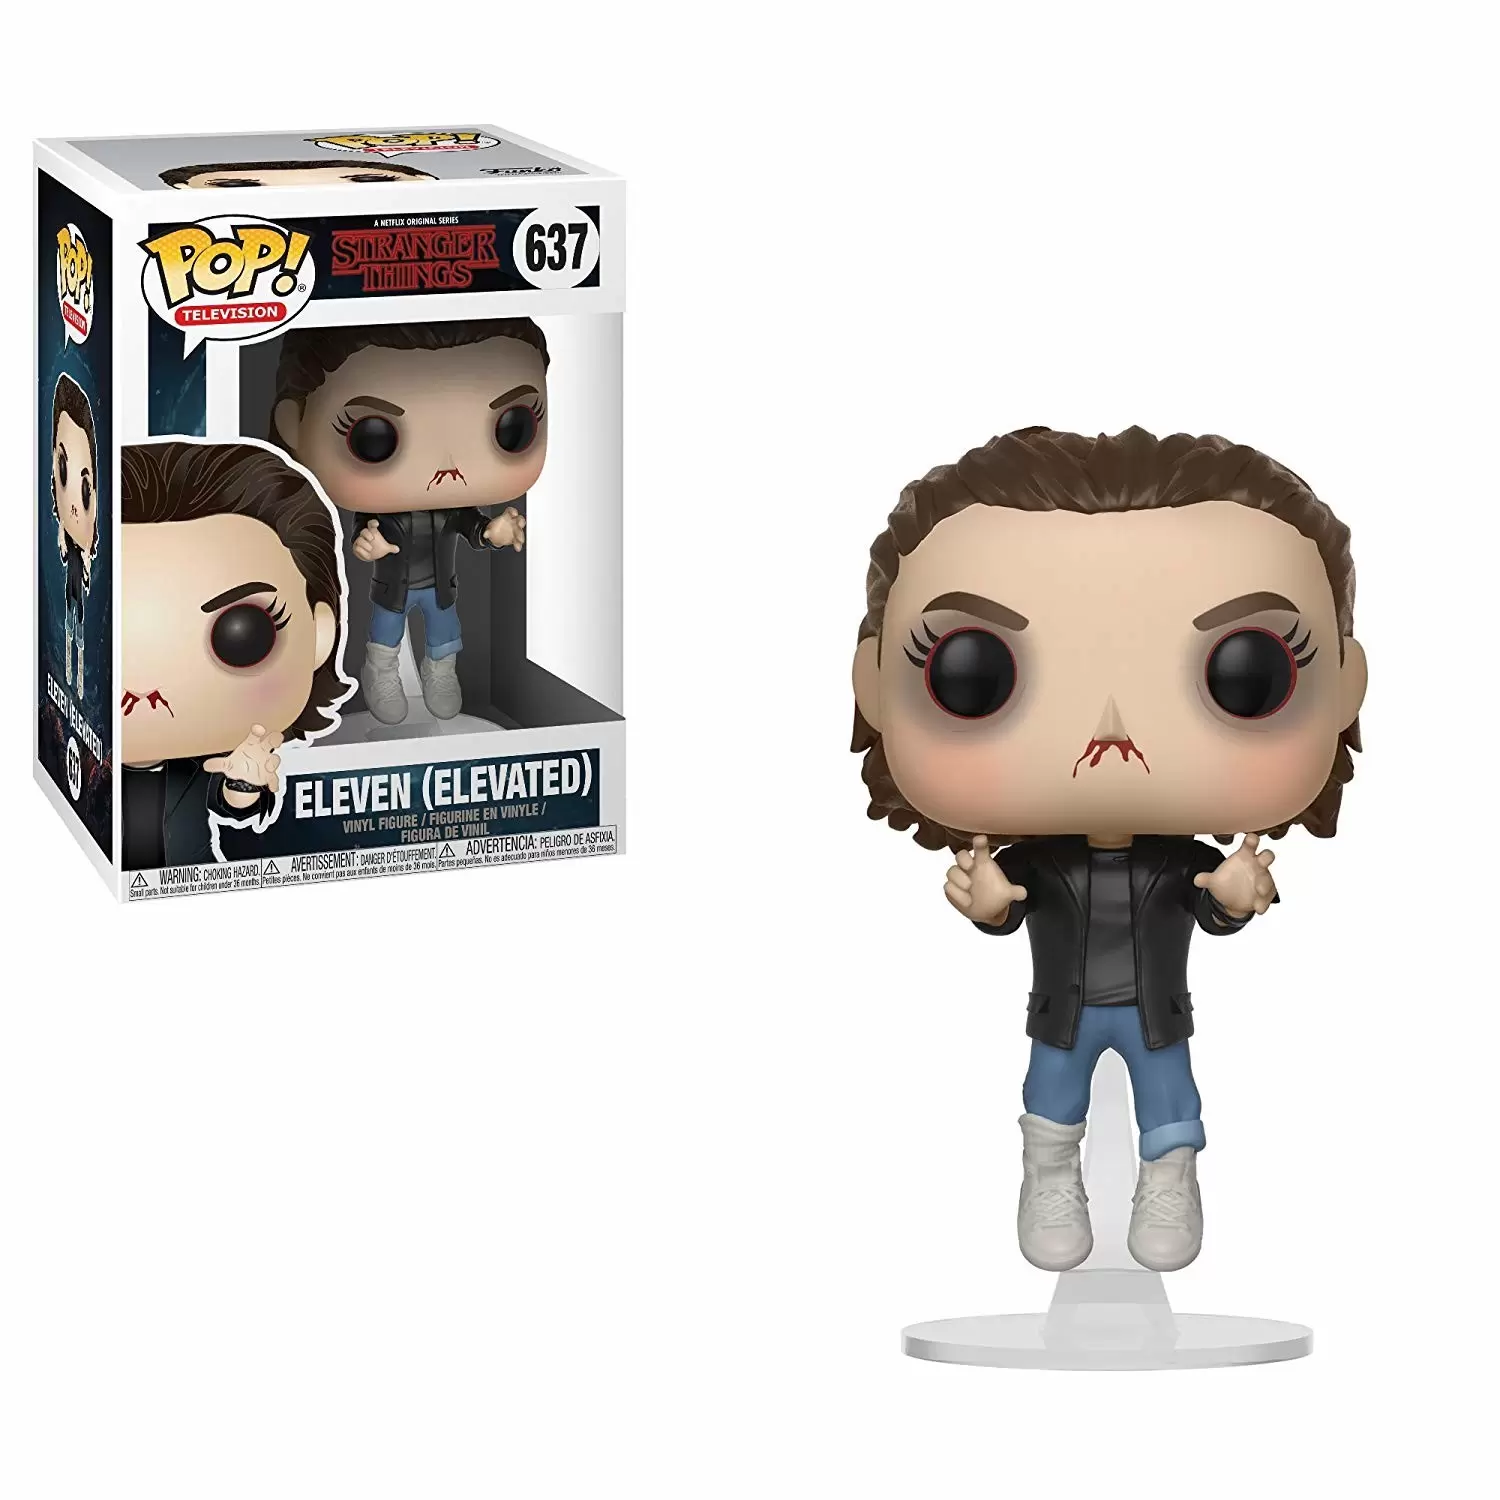 POP! Television - Stranger Things 2 - Eleven Elevated